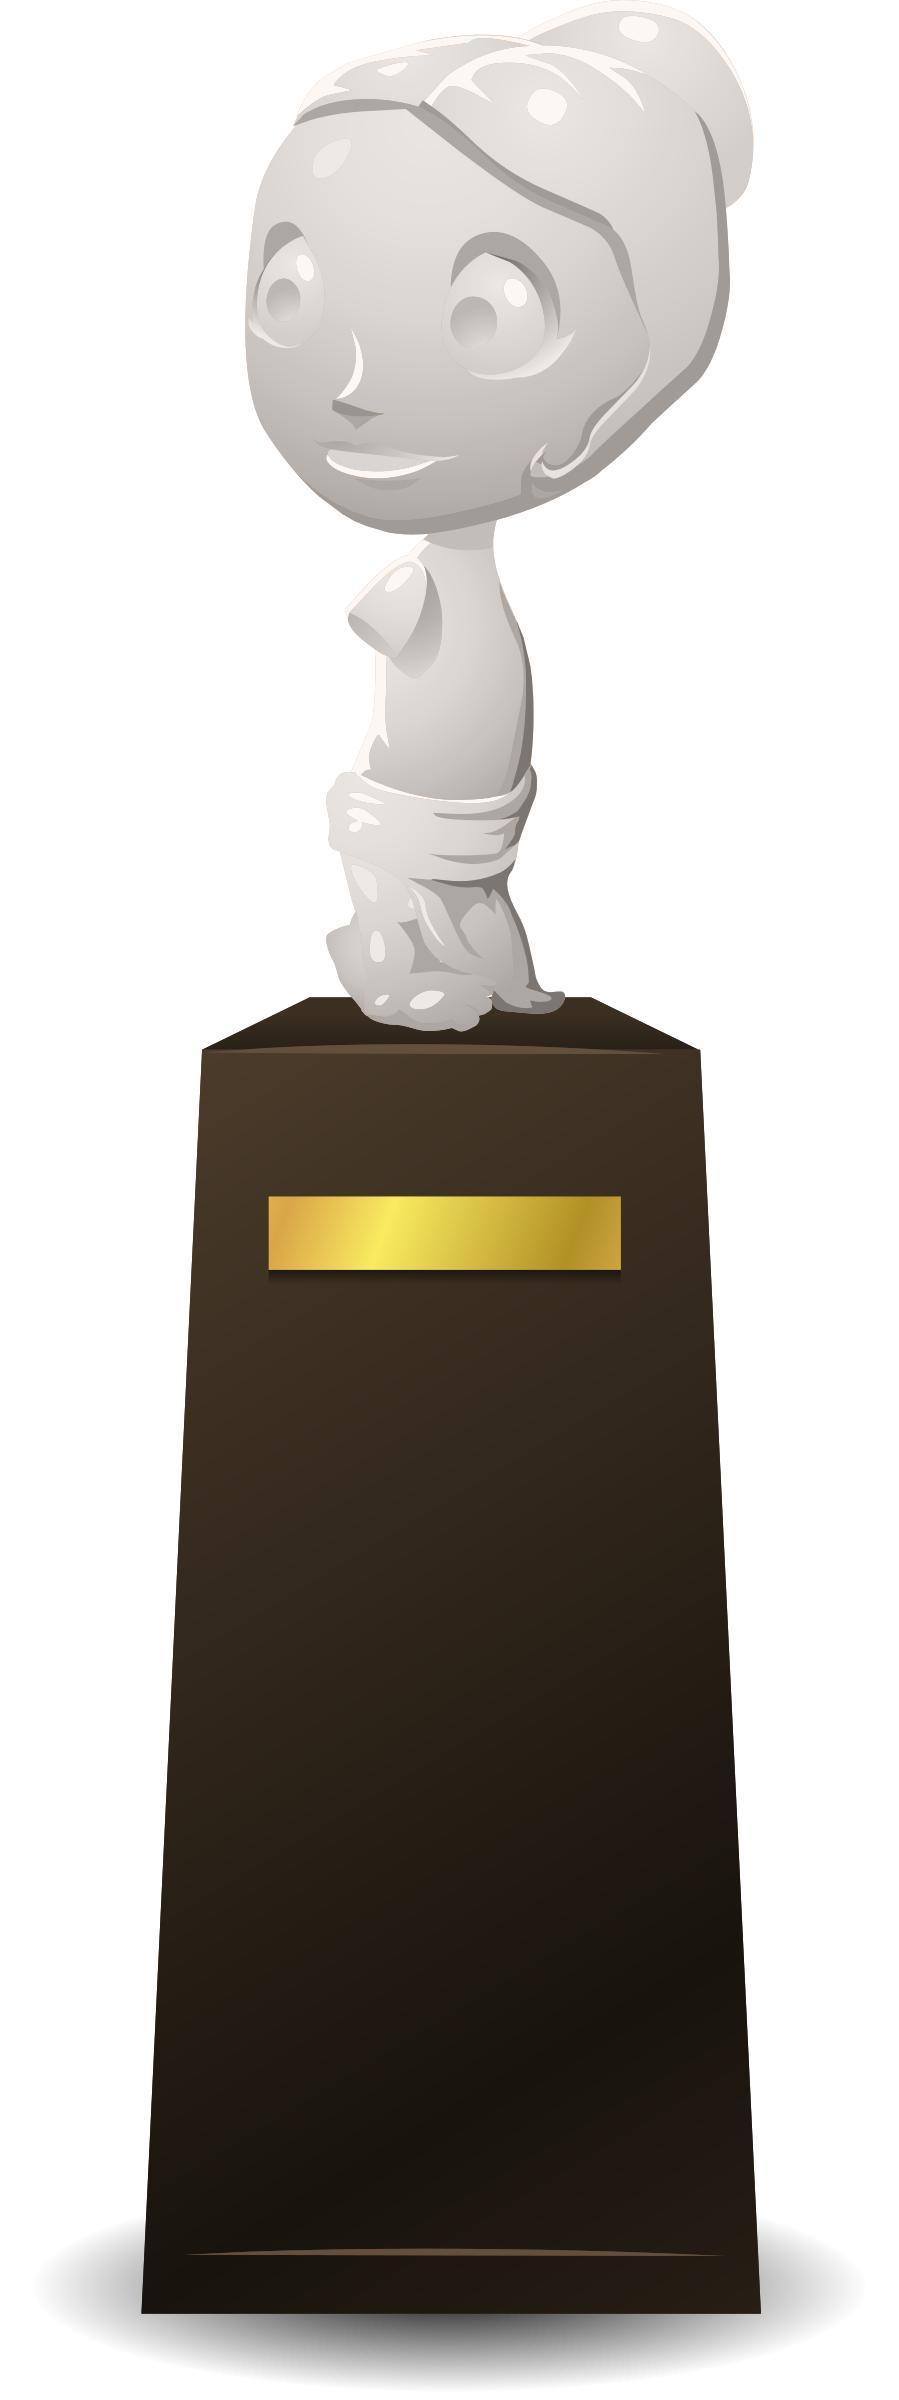 Statue on a pedestal from Glitch png transparent